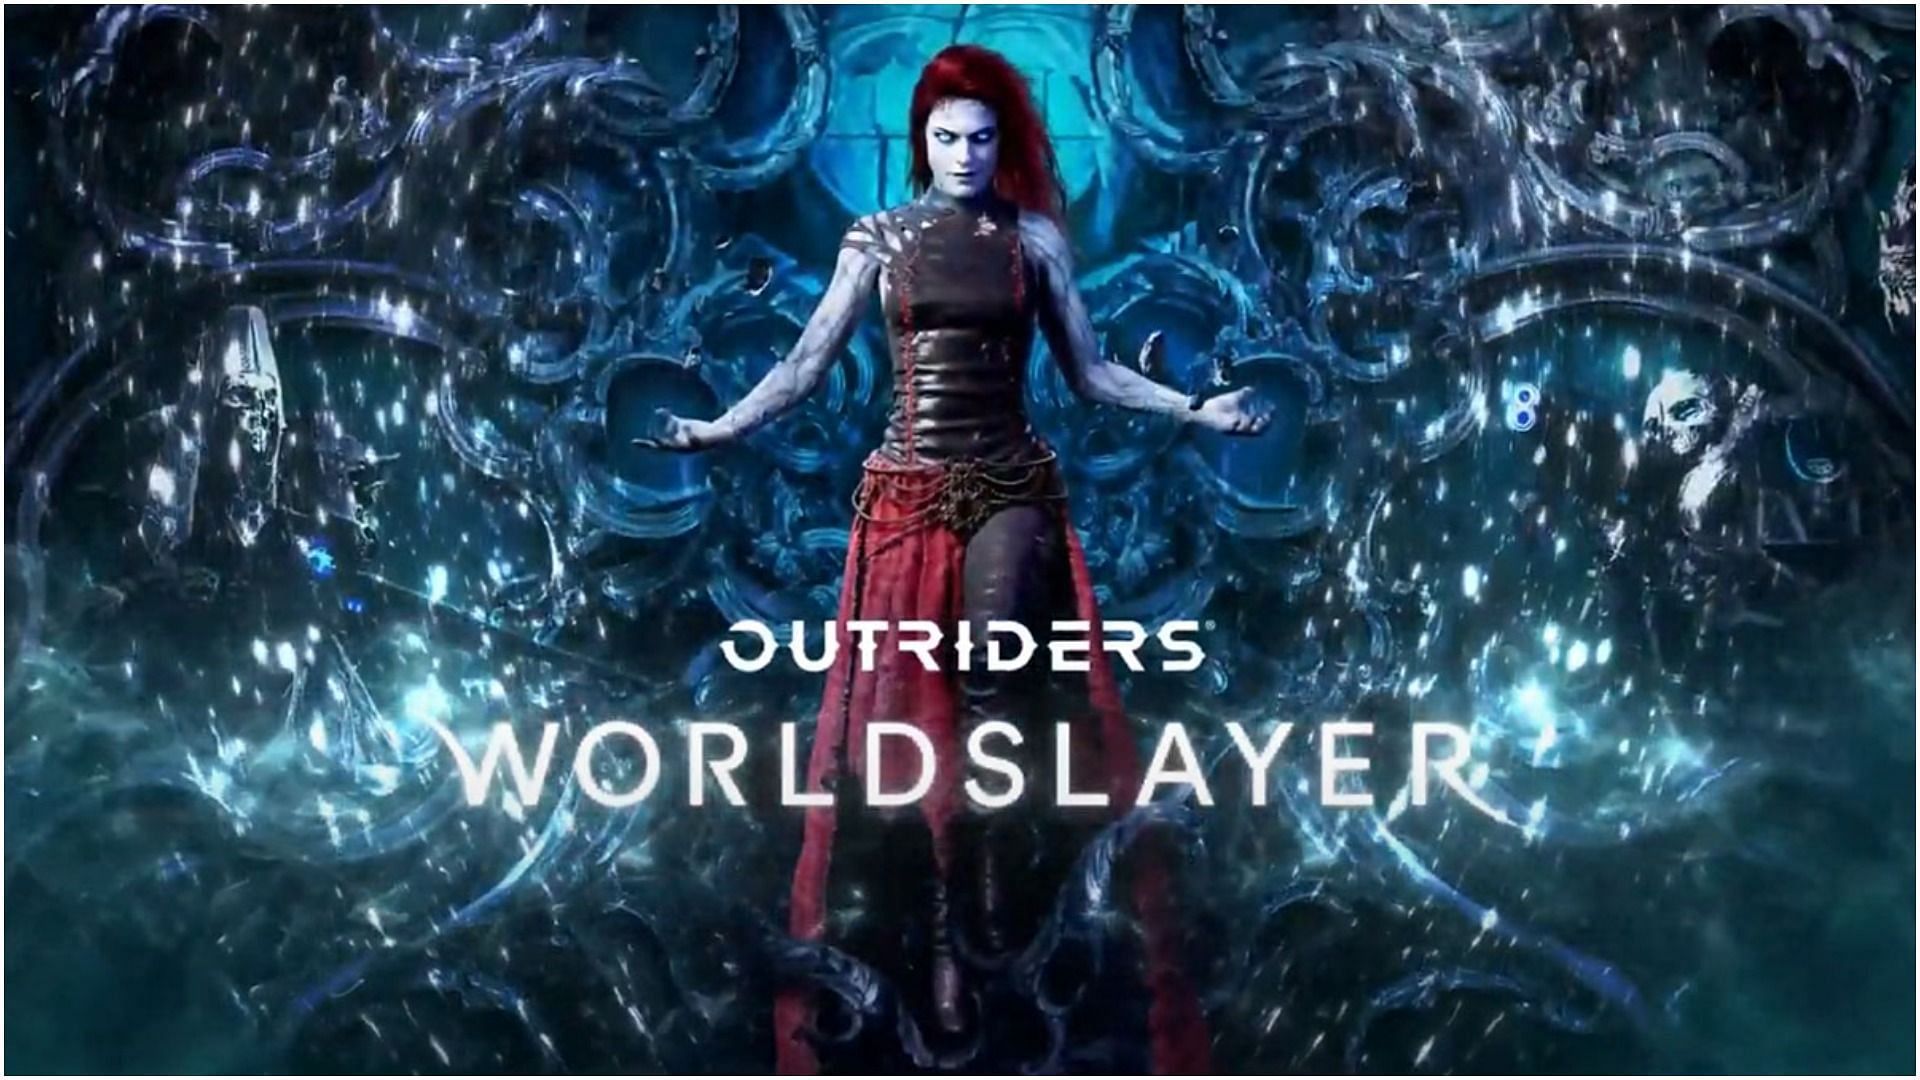 Outriders Worldslayer is set to be the game&#039;s largest expansion (Image via Square Enix)